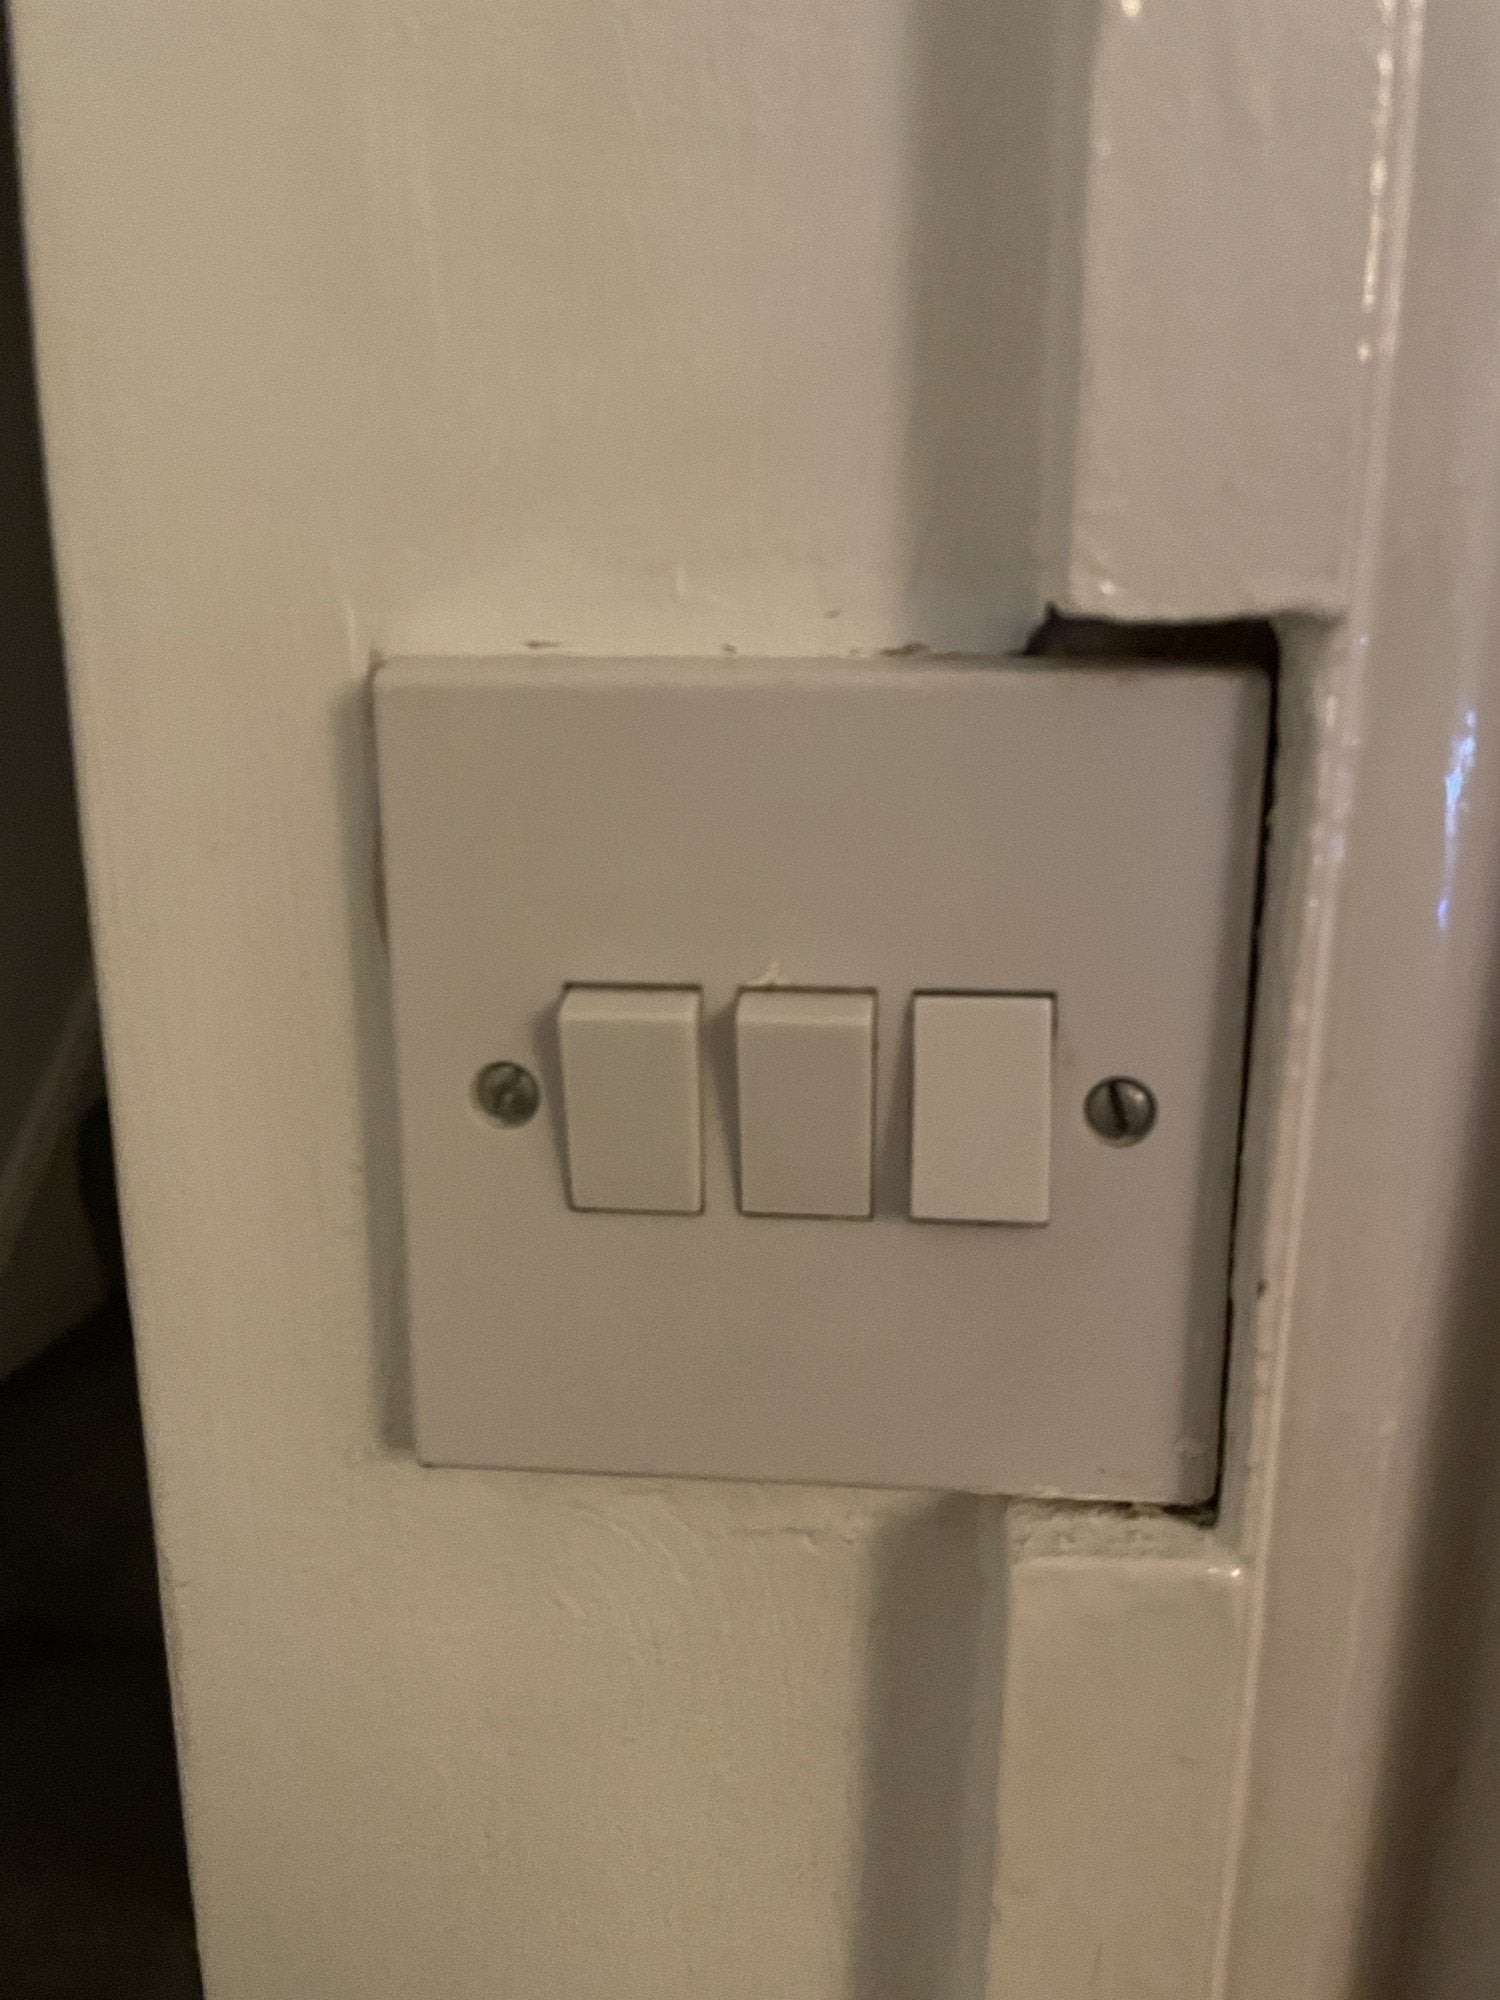 What switch could I use for this that does not